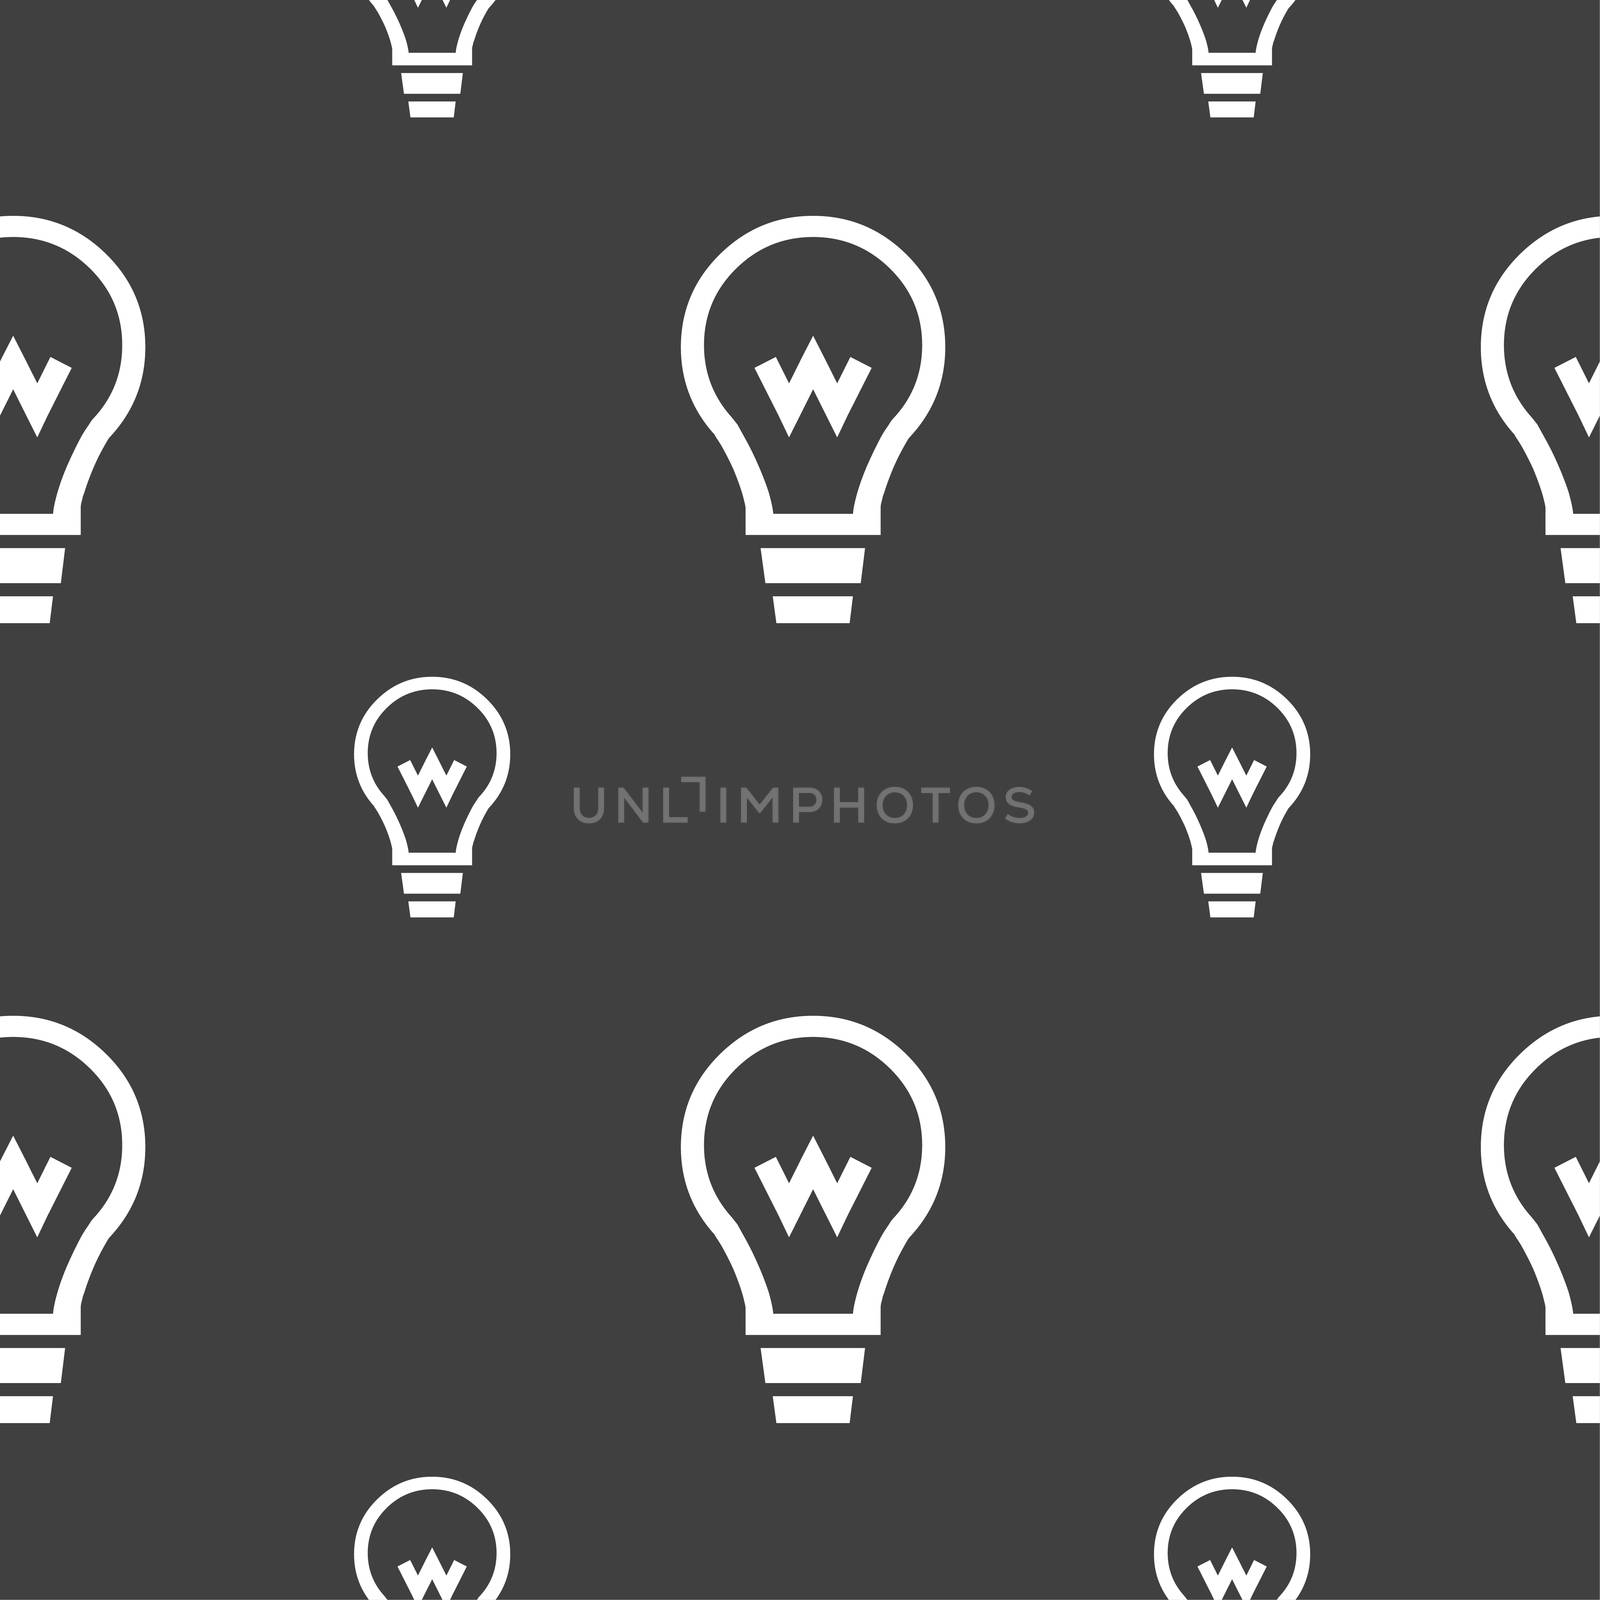 Light bulb icon sign. Seamless pattern on a gray background. illustration